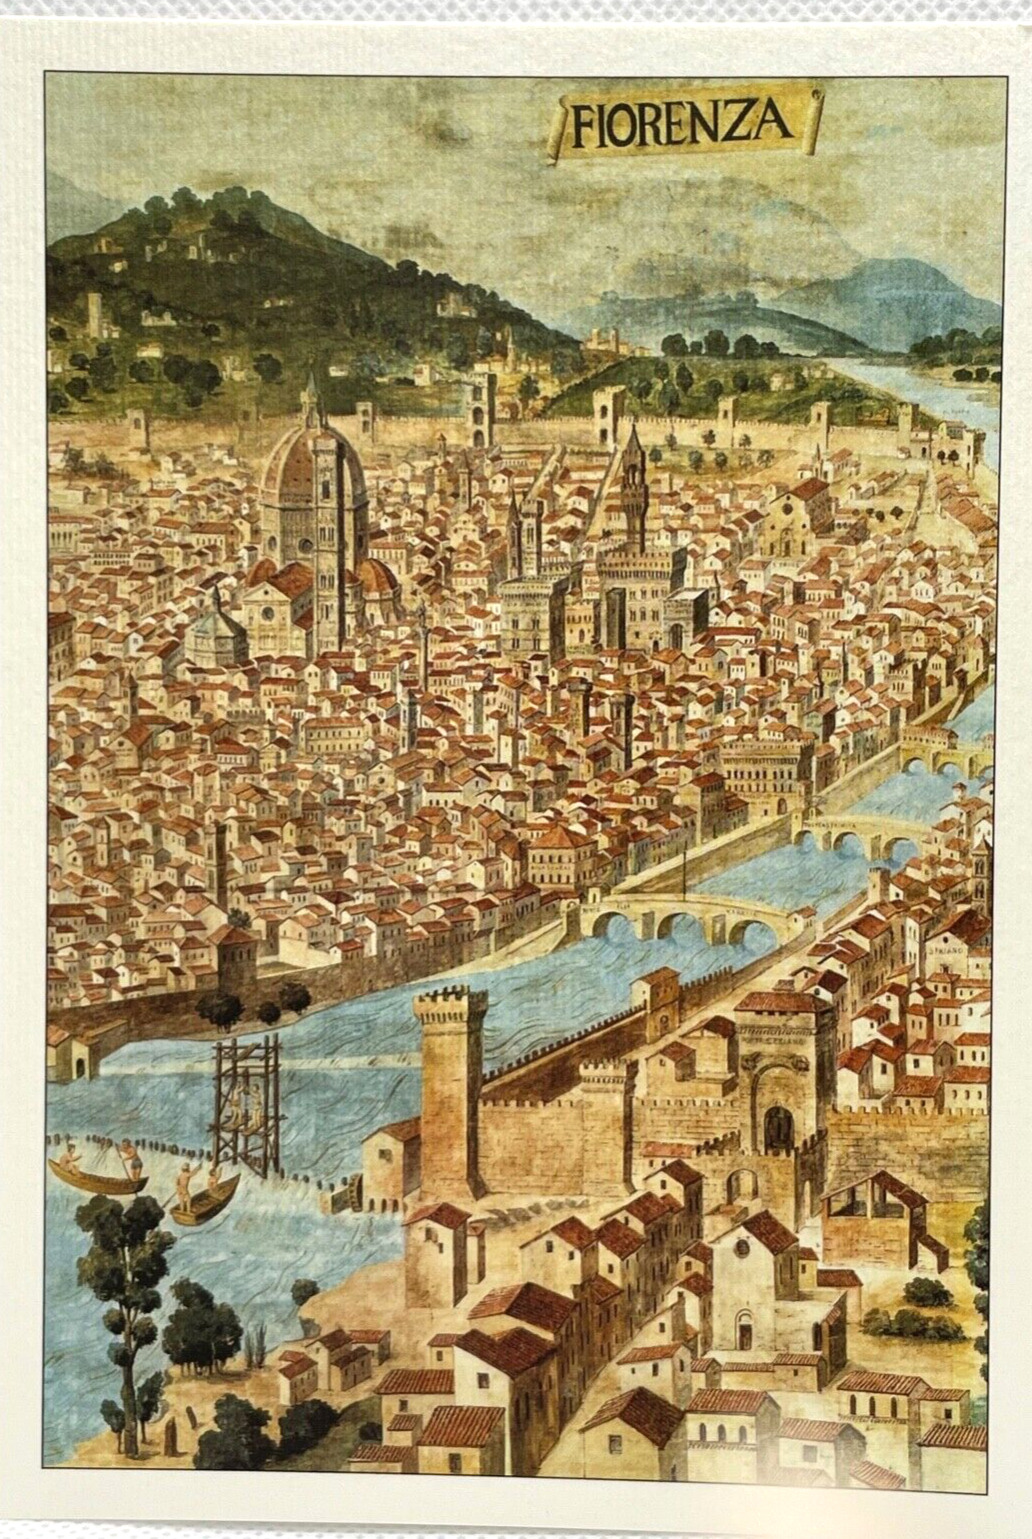 Postcard:  Historic image of Florence Italy (Fiorenza), its ancient structures